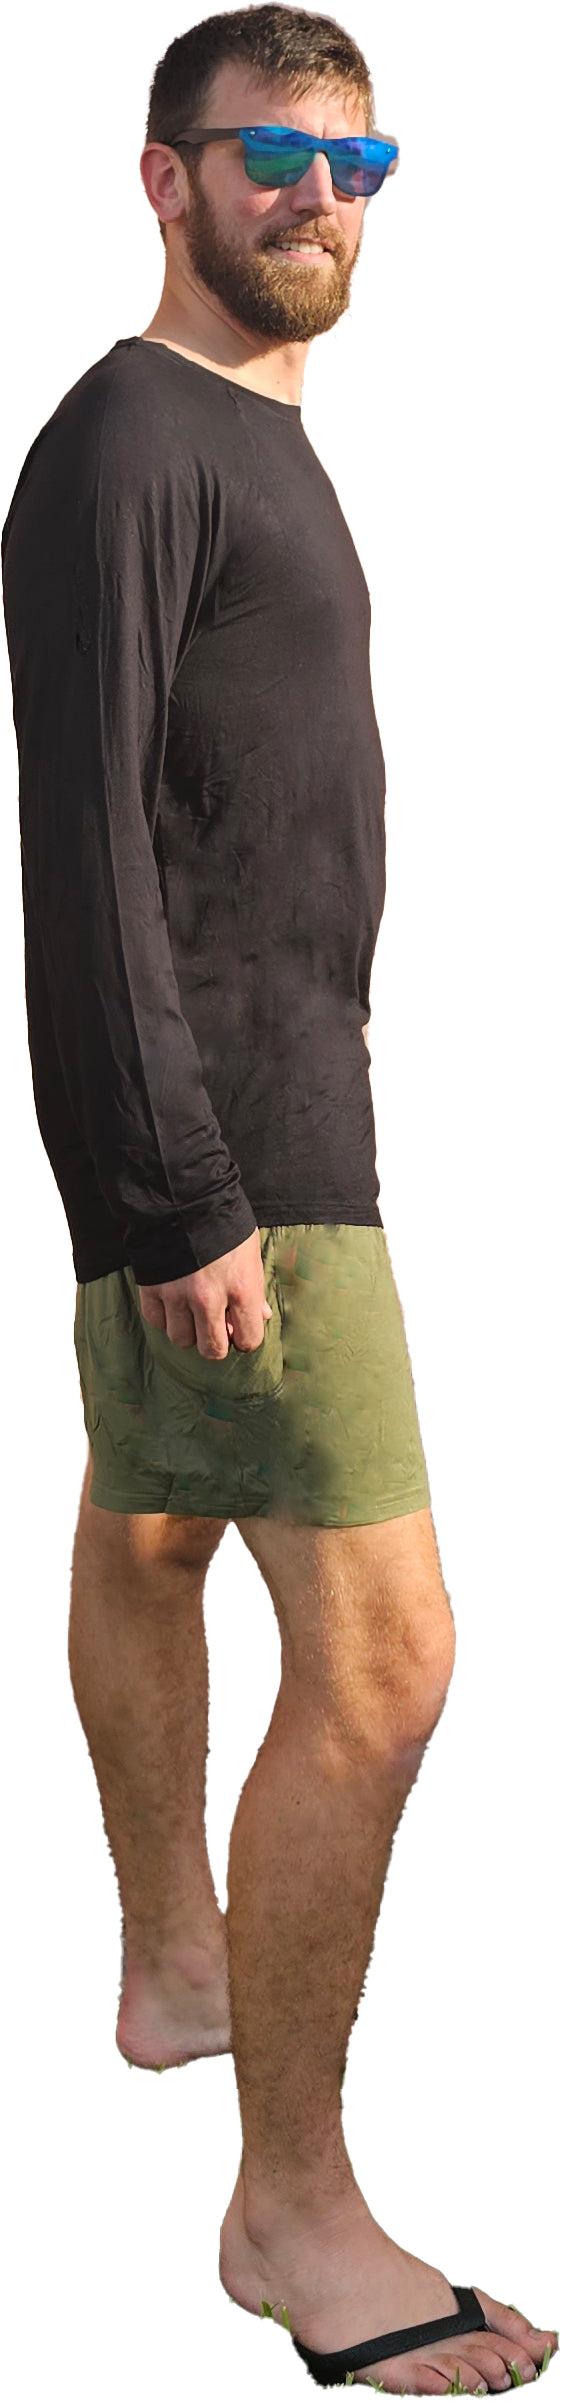 a man in a black shirt and green shorts